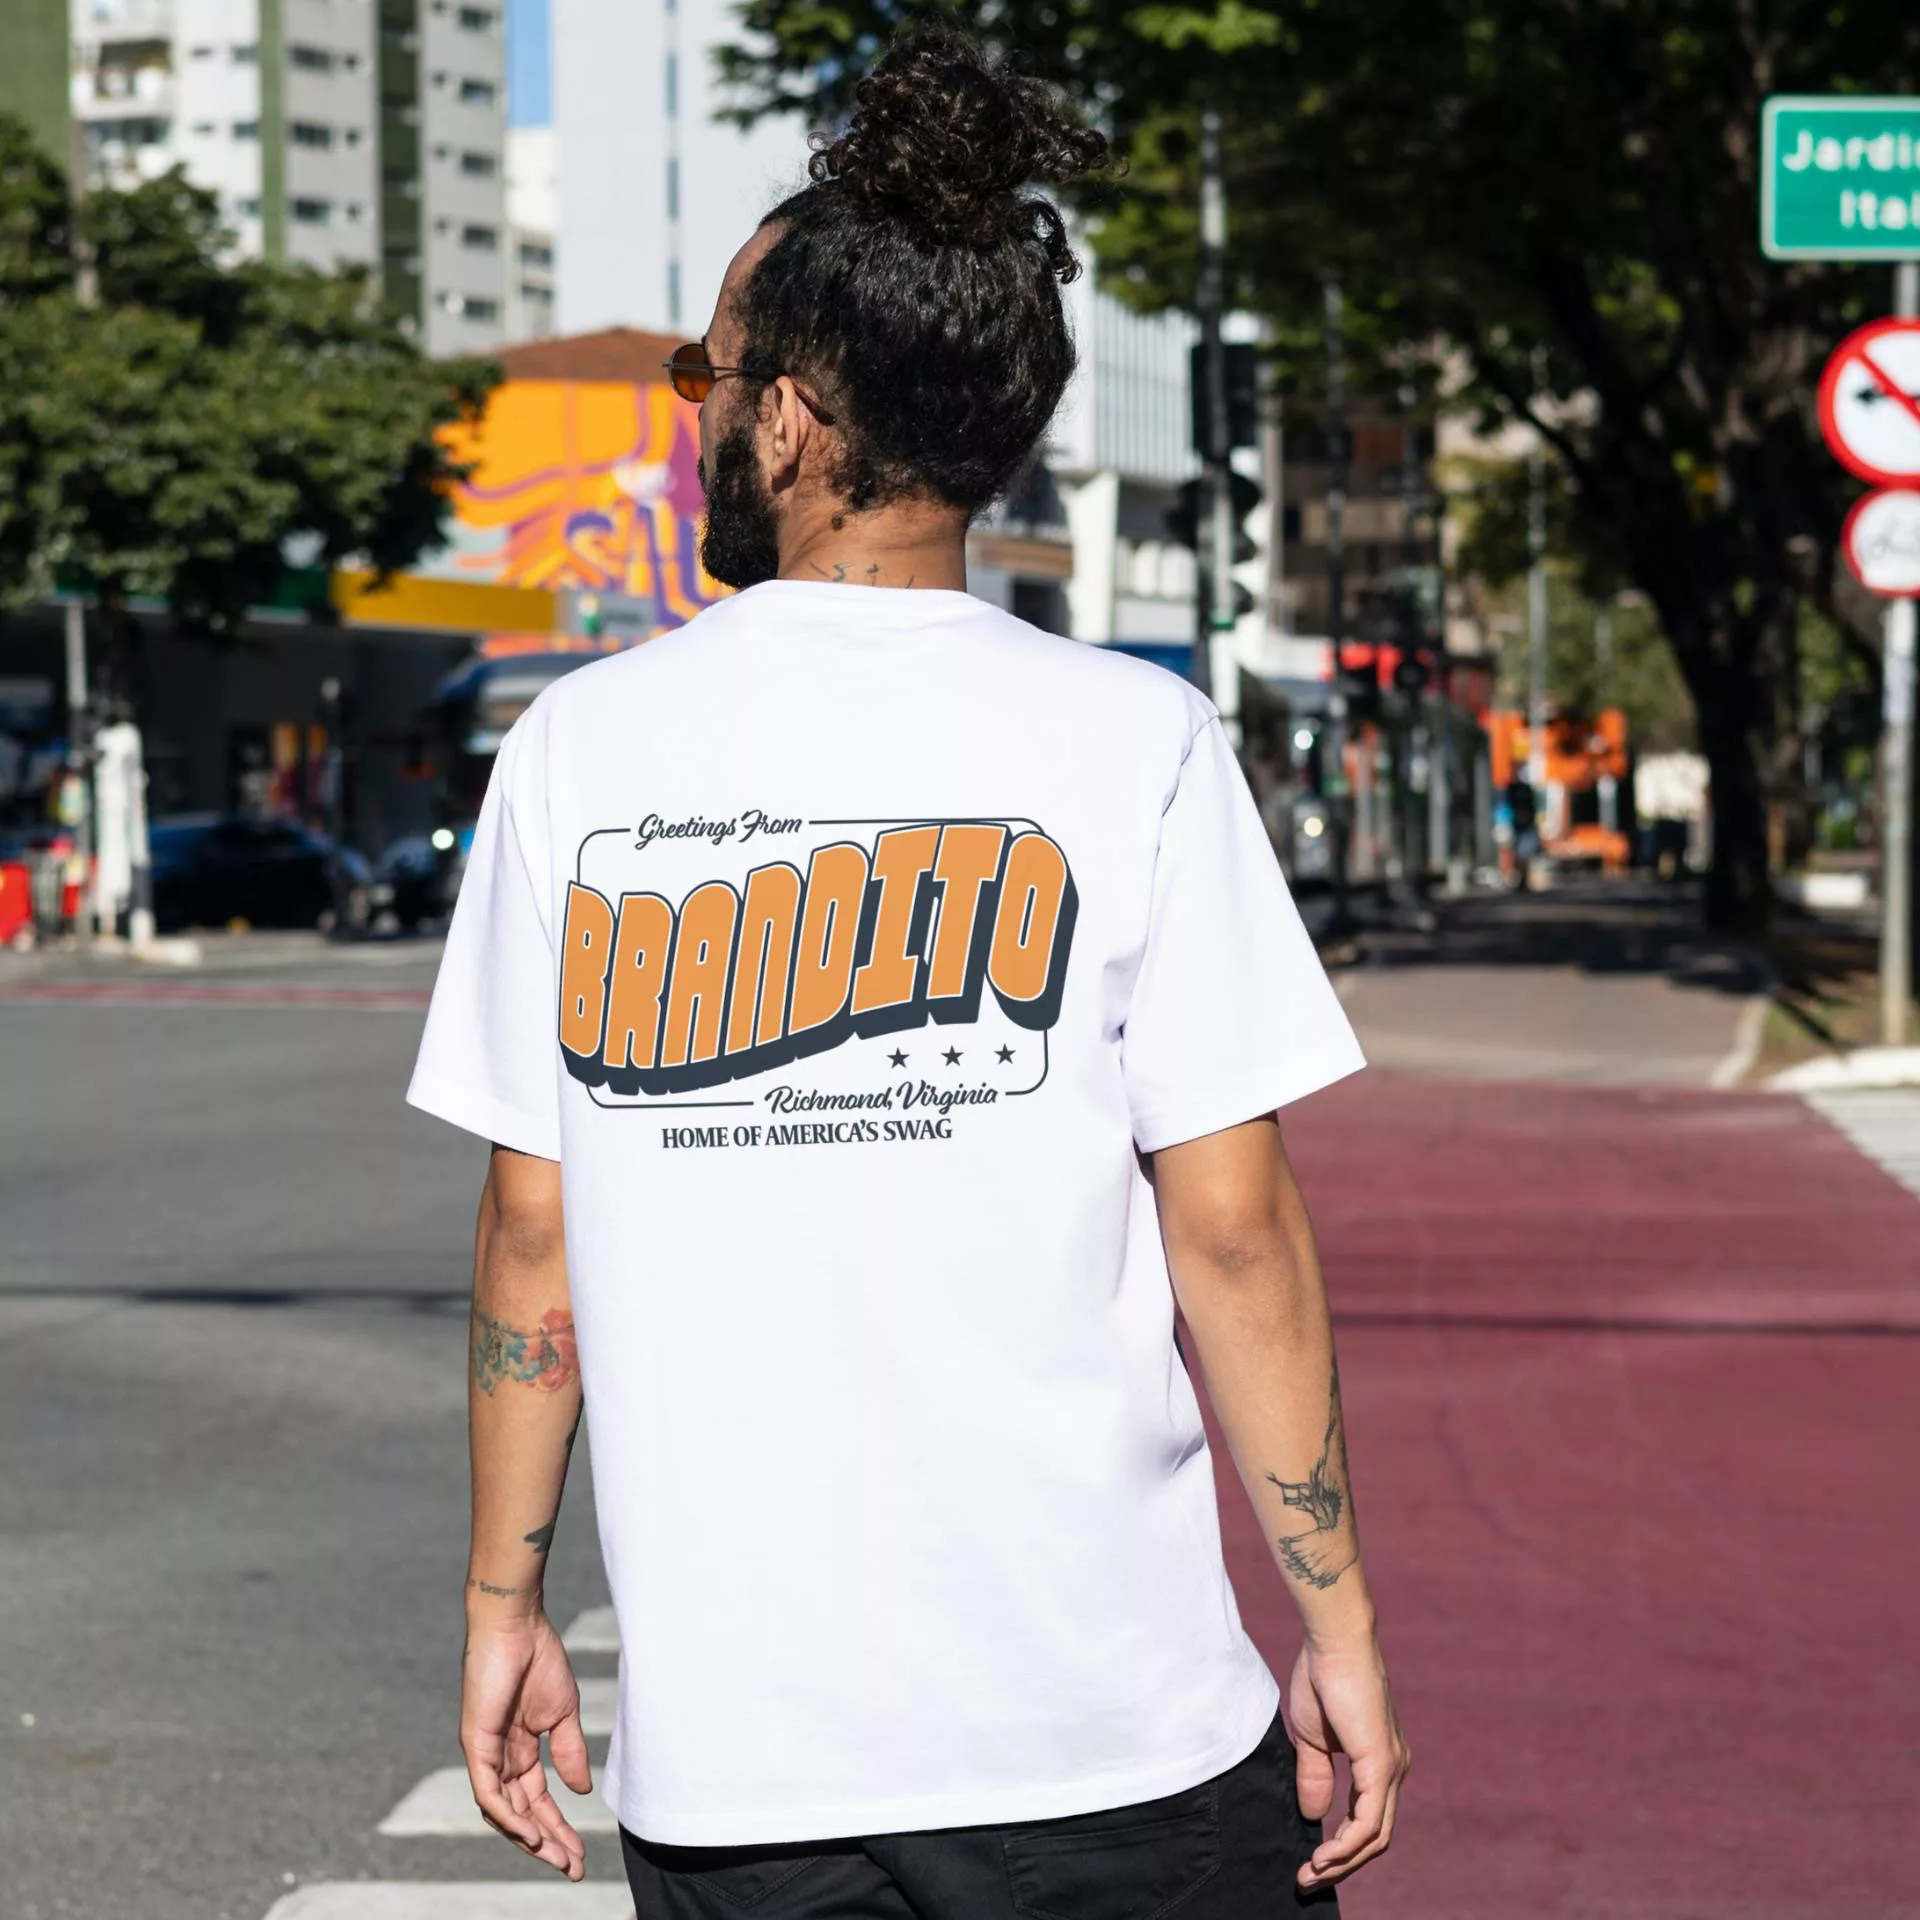 A person crossing the street wearing a Brandito shirt